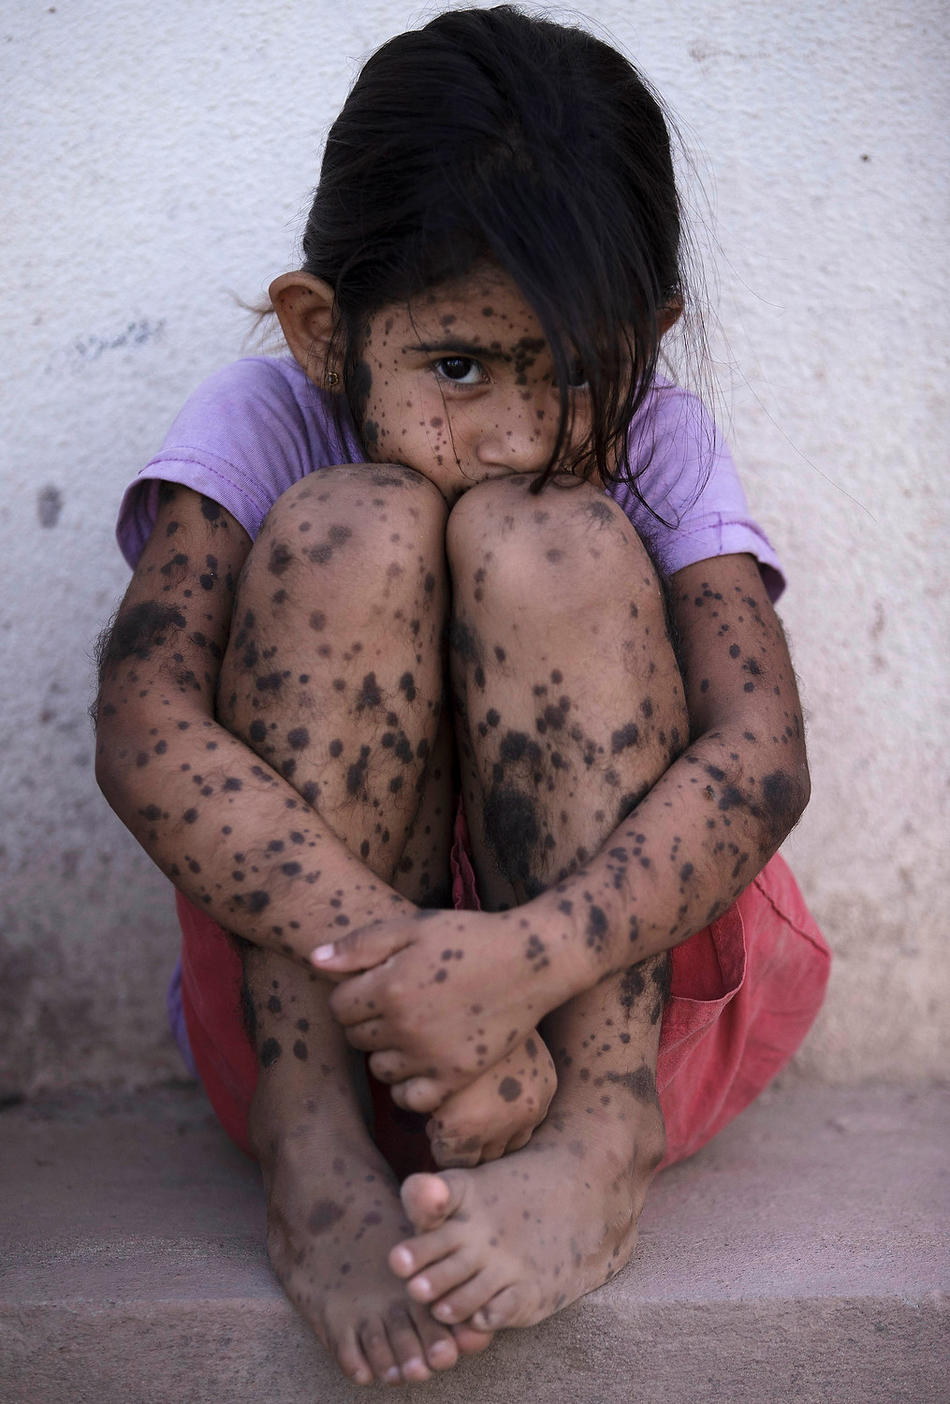 In this April 1, 2013 photo, Aixa Cano, 5, who has hairy moles all over her body that doctors can’t explain, sits on a stoop outside her home in Avia Terai, in Chaco province, Argentina. Although it’s nearly impossible to prove, doctors say Aixa’s birth defect may be linked to agrochemicals. In Chaco, children are four times more likely to be born with devastating birth defects since biotechnology dramatically expanded farming in Argentina. Chemicals routinely contaminate homes, classrooms and drinking water. (AP Photo/Natacha Pisarenko)